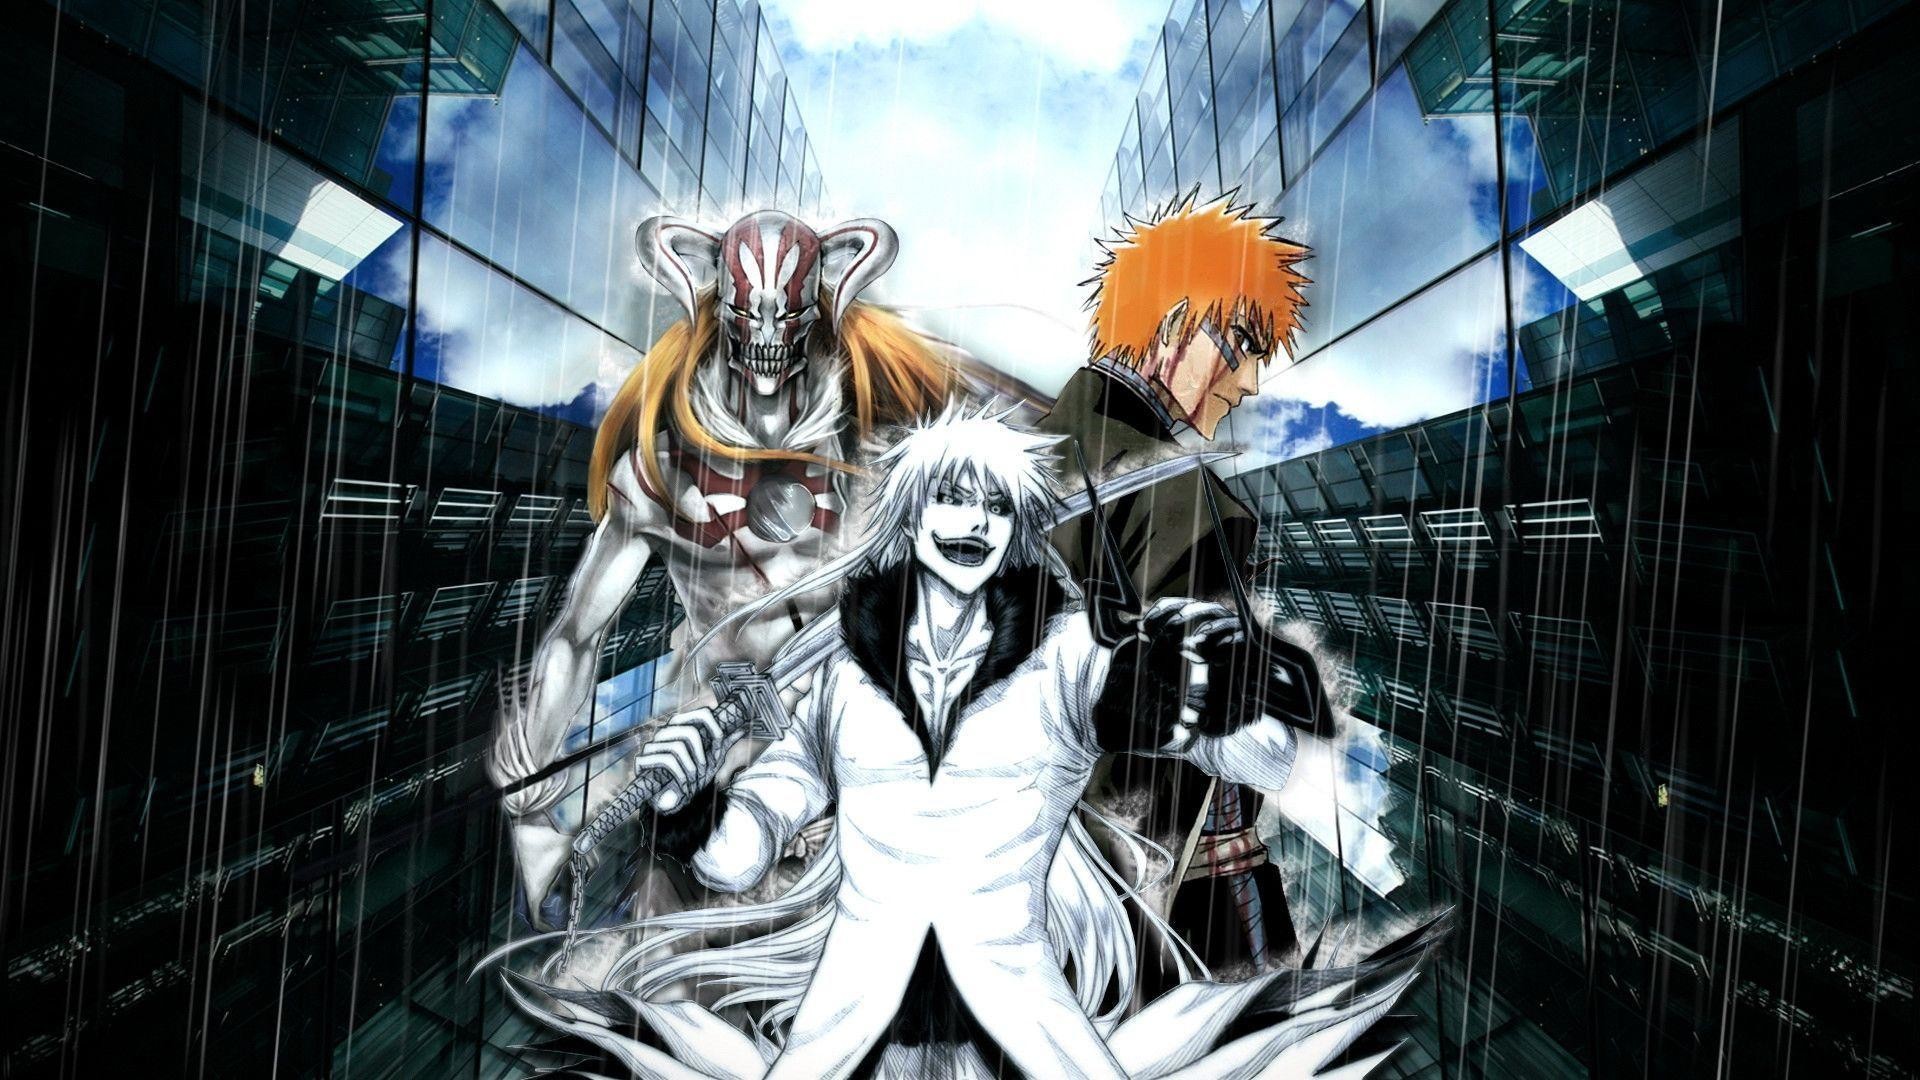 Awesome Bleach Wallpapers 51 images